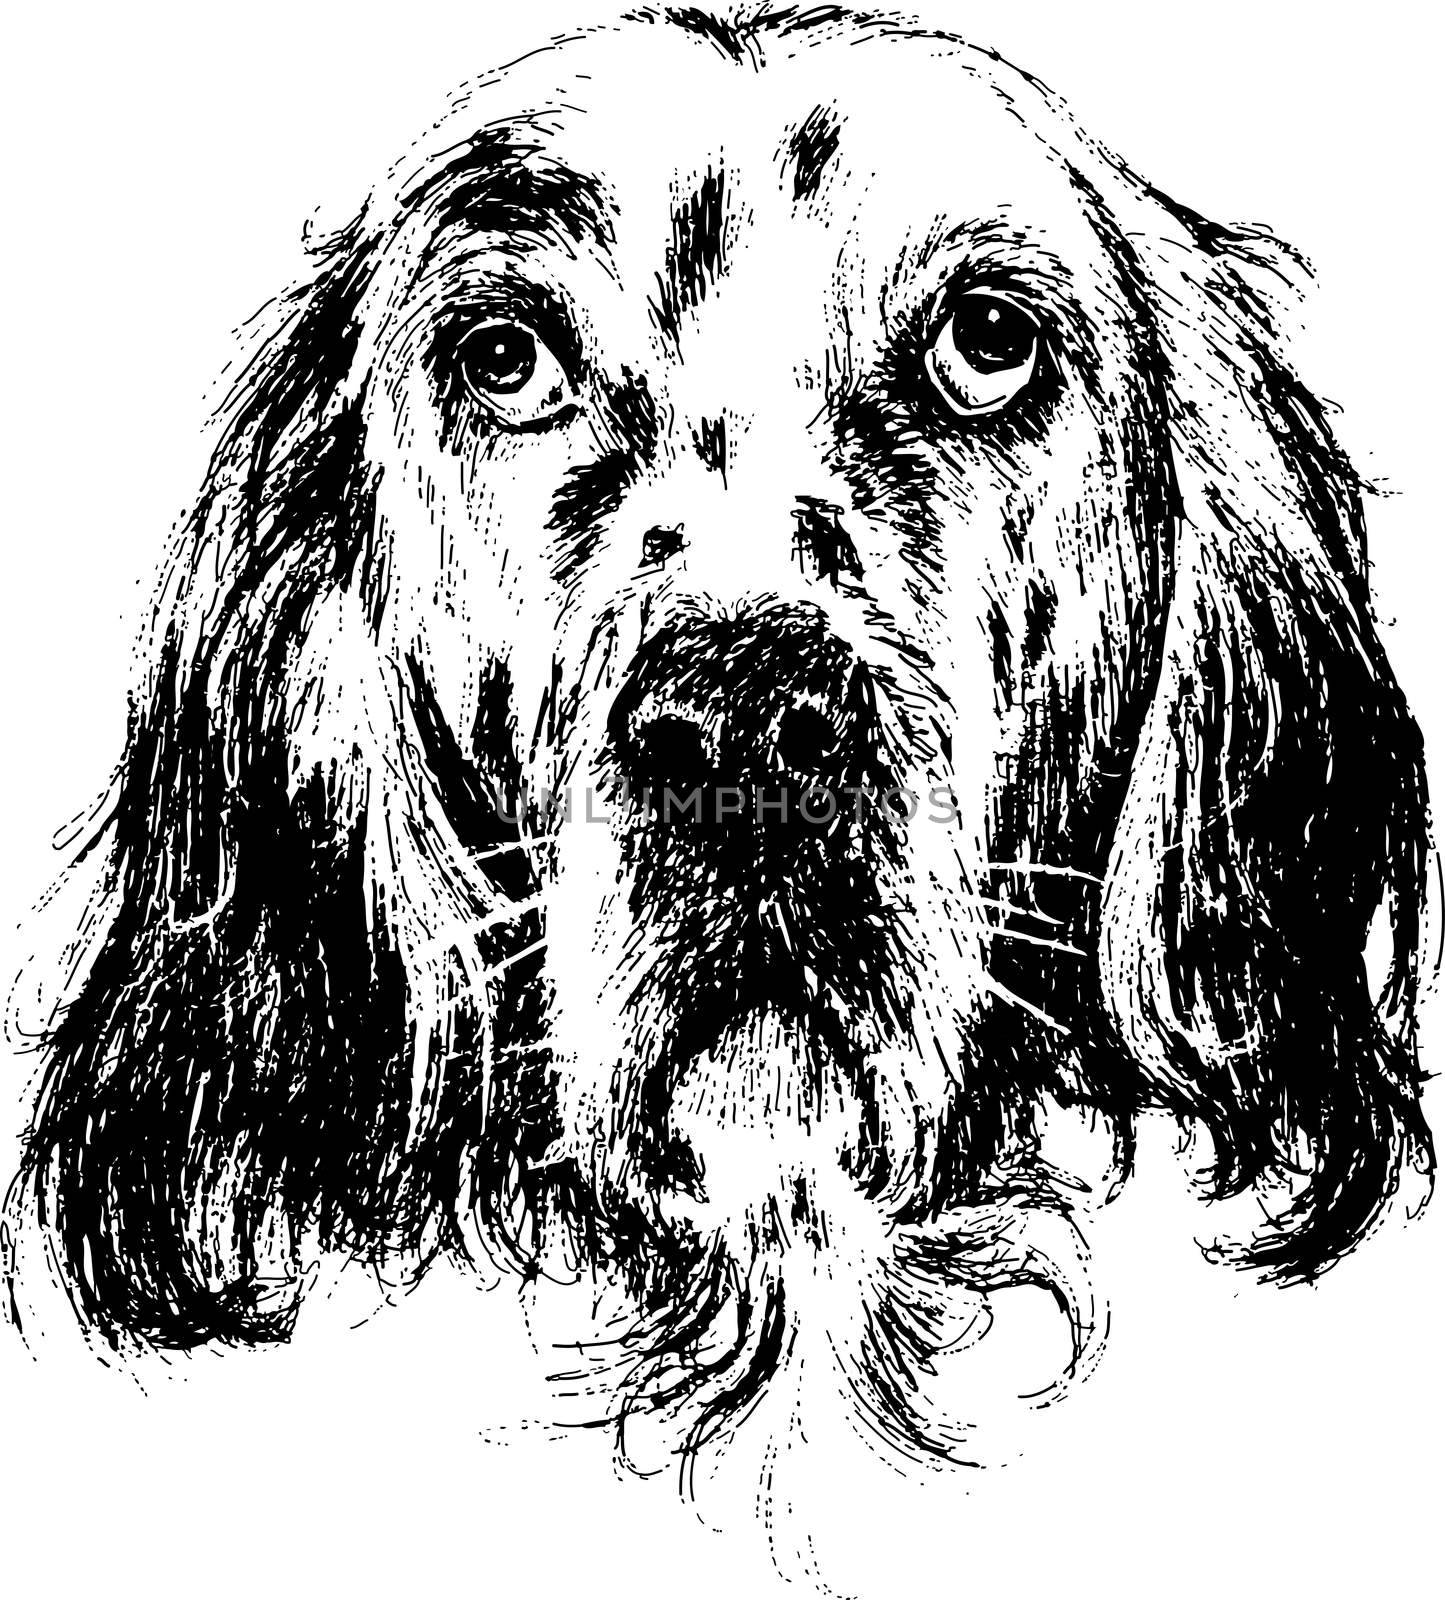 English setter by simpleBE